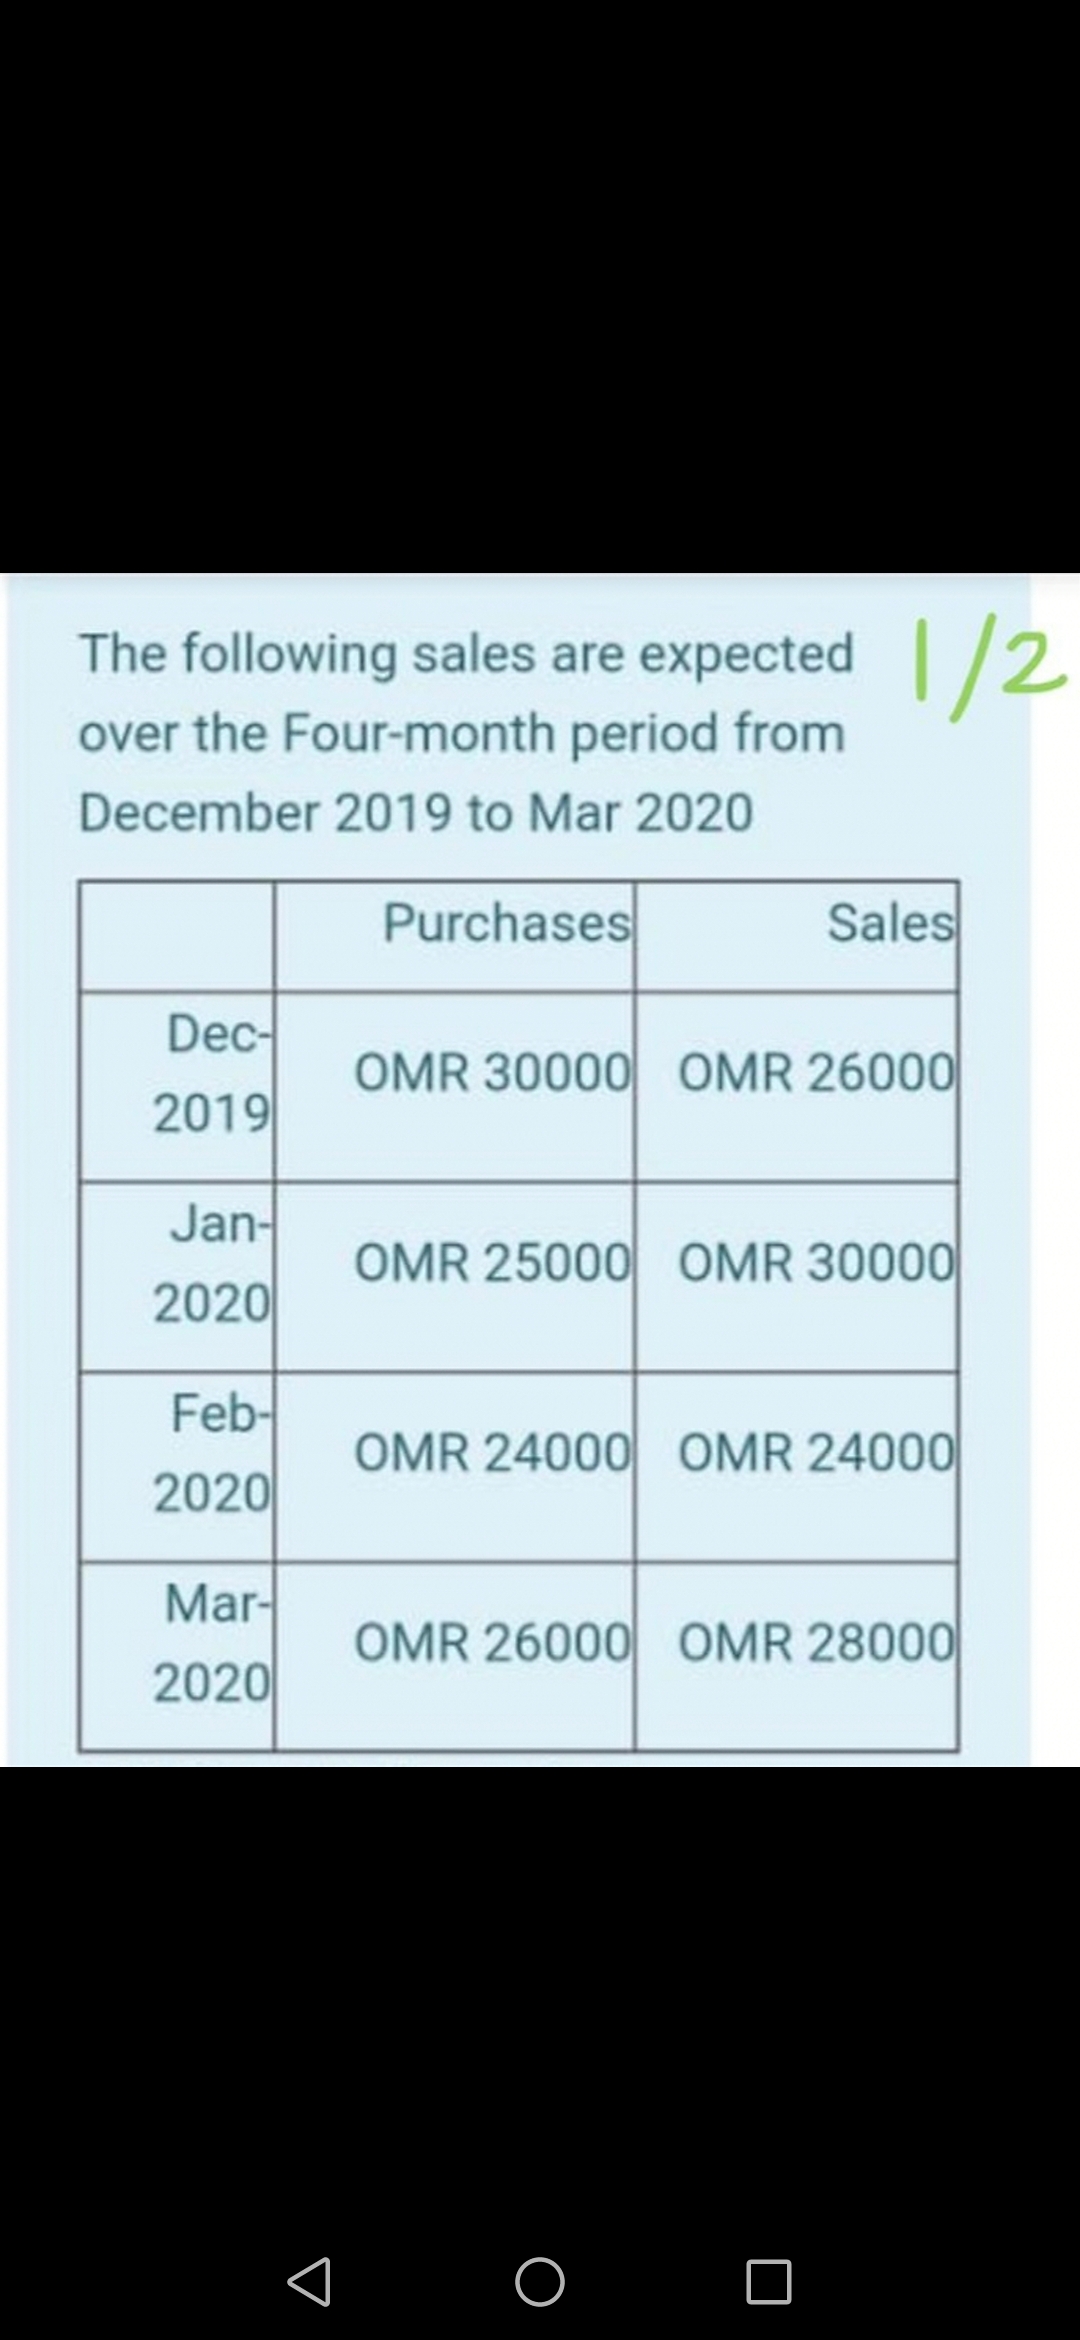 The following sales are expected/2
over the Four-month period from
December 2019 to Mar 2020
Purchases
Sales
Dec-
OMR 30000 OMR 26000
2019
Jan-
OMR 25000 OMR 30000
2020
Feb-
OMR 24000 OMR 24000
2020
Mar-
OMR 26000 OMR 28000
2020
< o O
